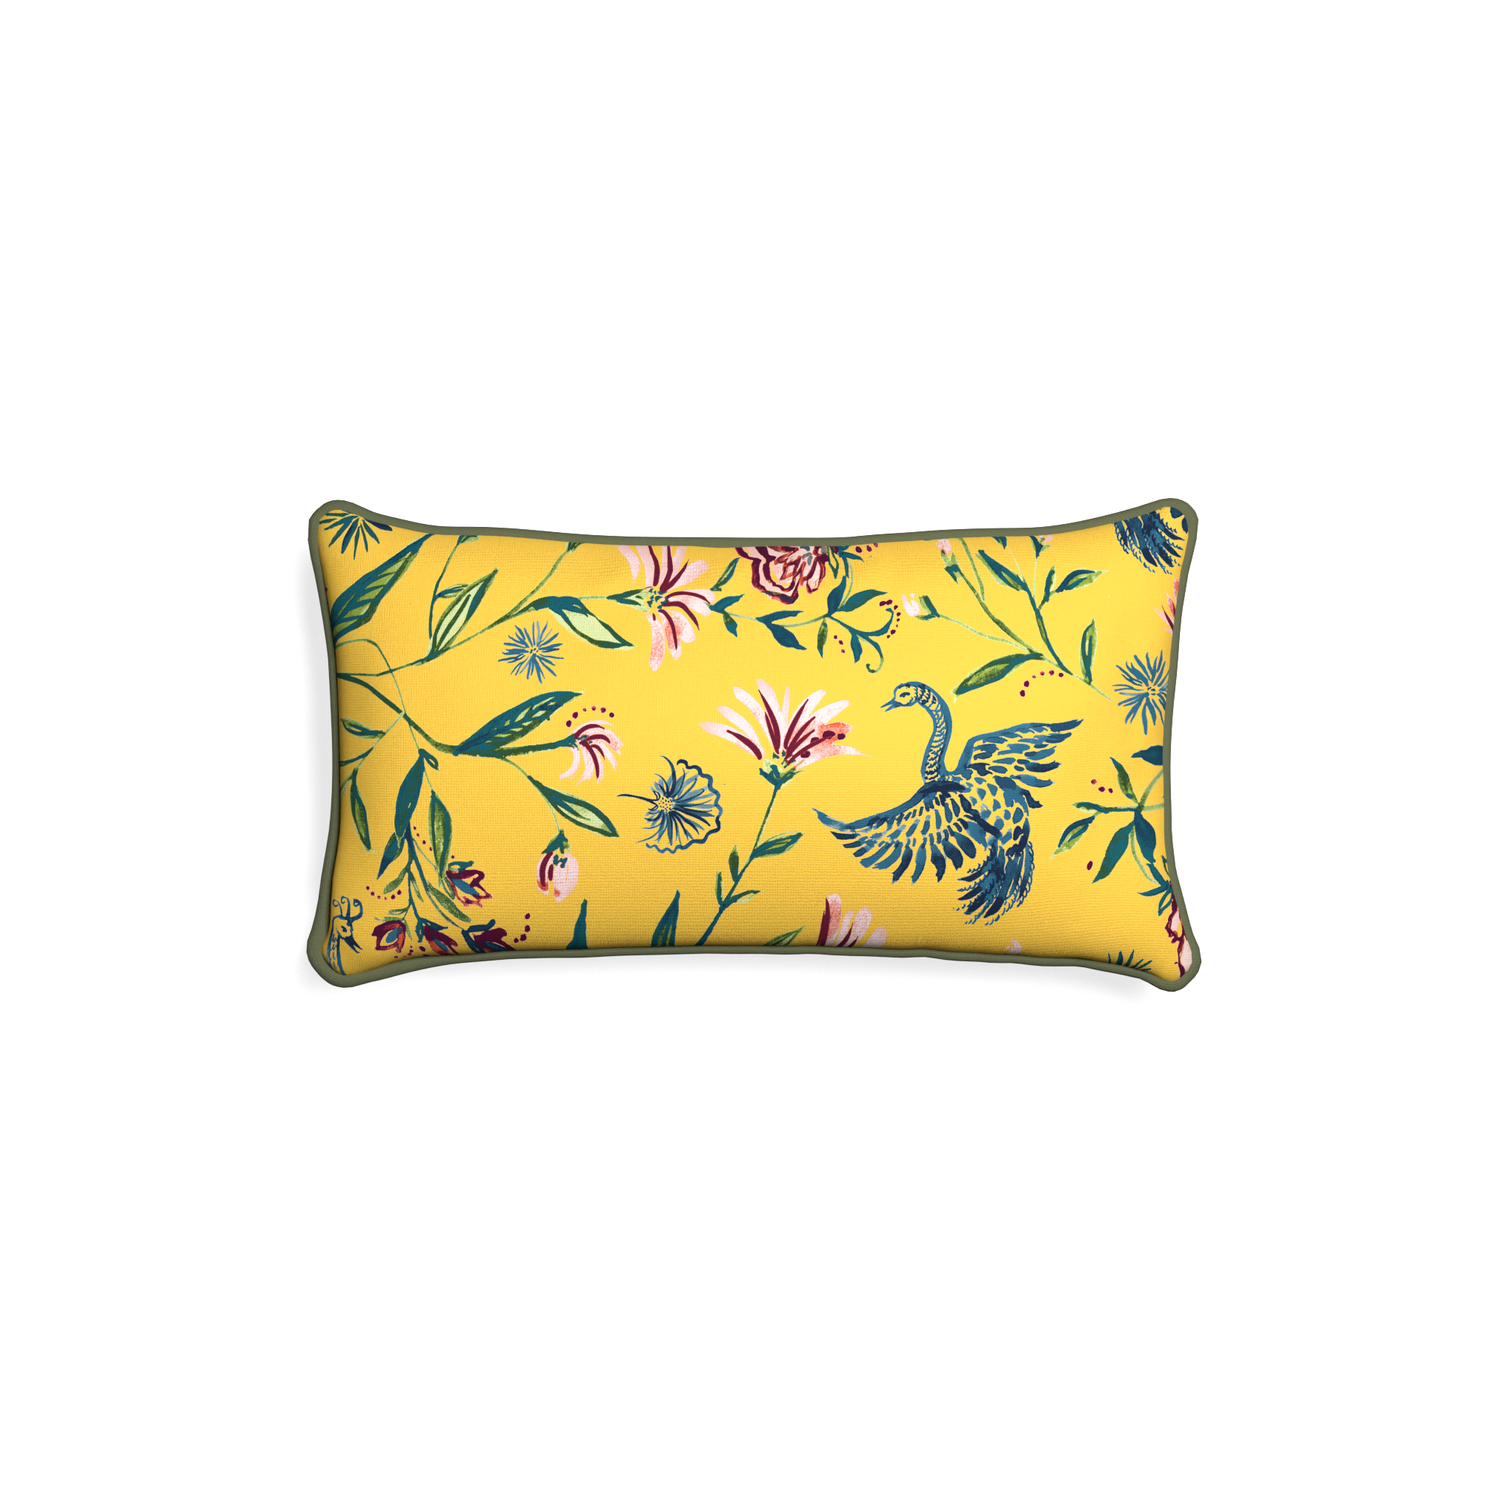 Petite-lumbar daphne canary custom yellow chinoiseriepillow with f piping on white background